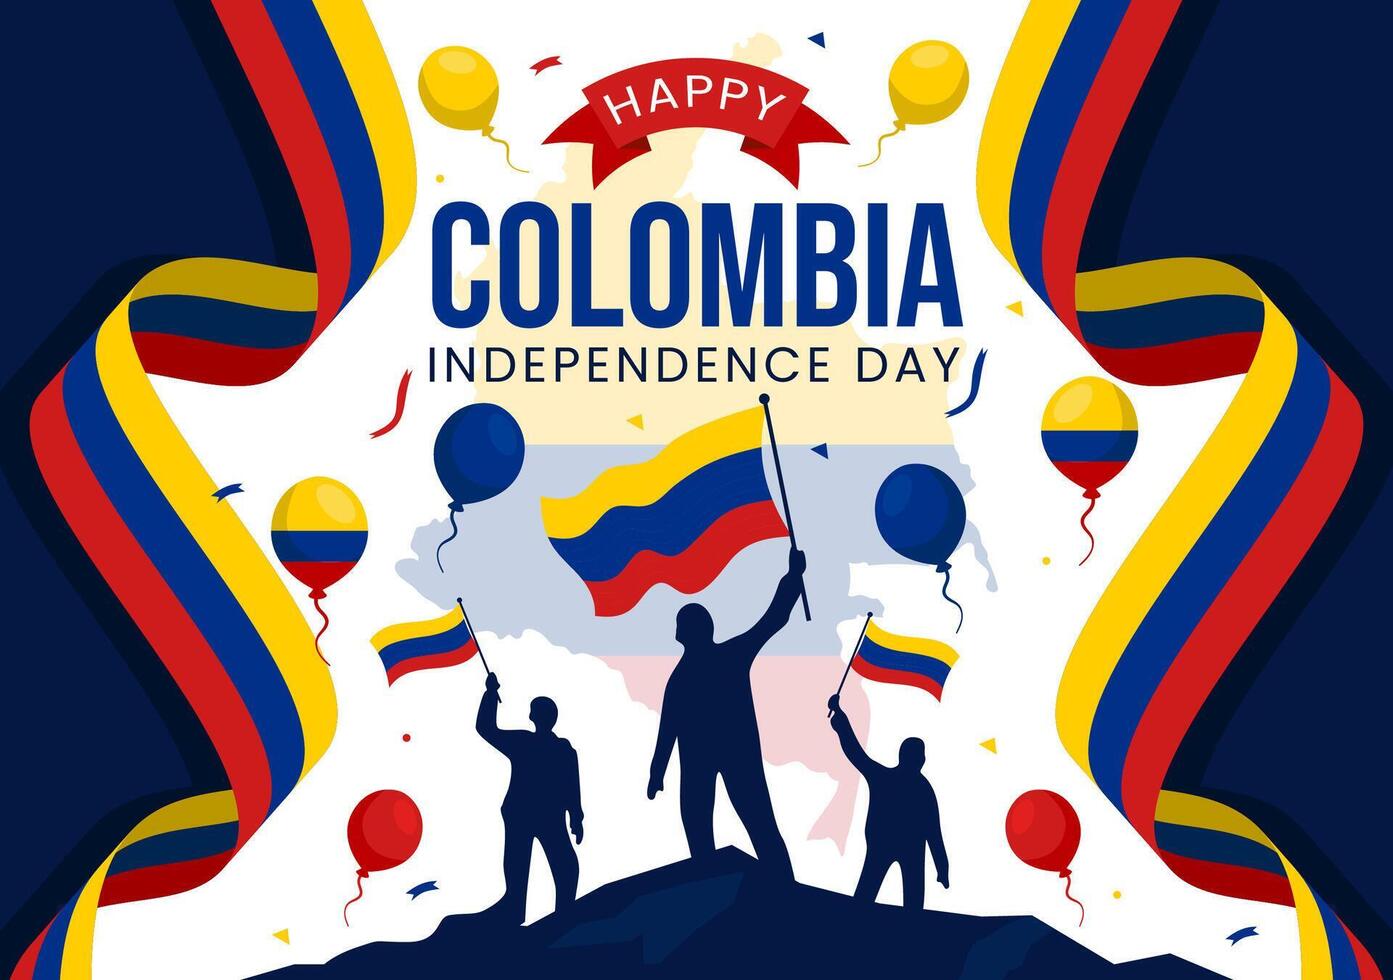 Happy Colombia Independence Day Illustration on 20 July with Waving Flag and Ribbon in National Holiday Celebration Flat Cartoon Background vector